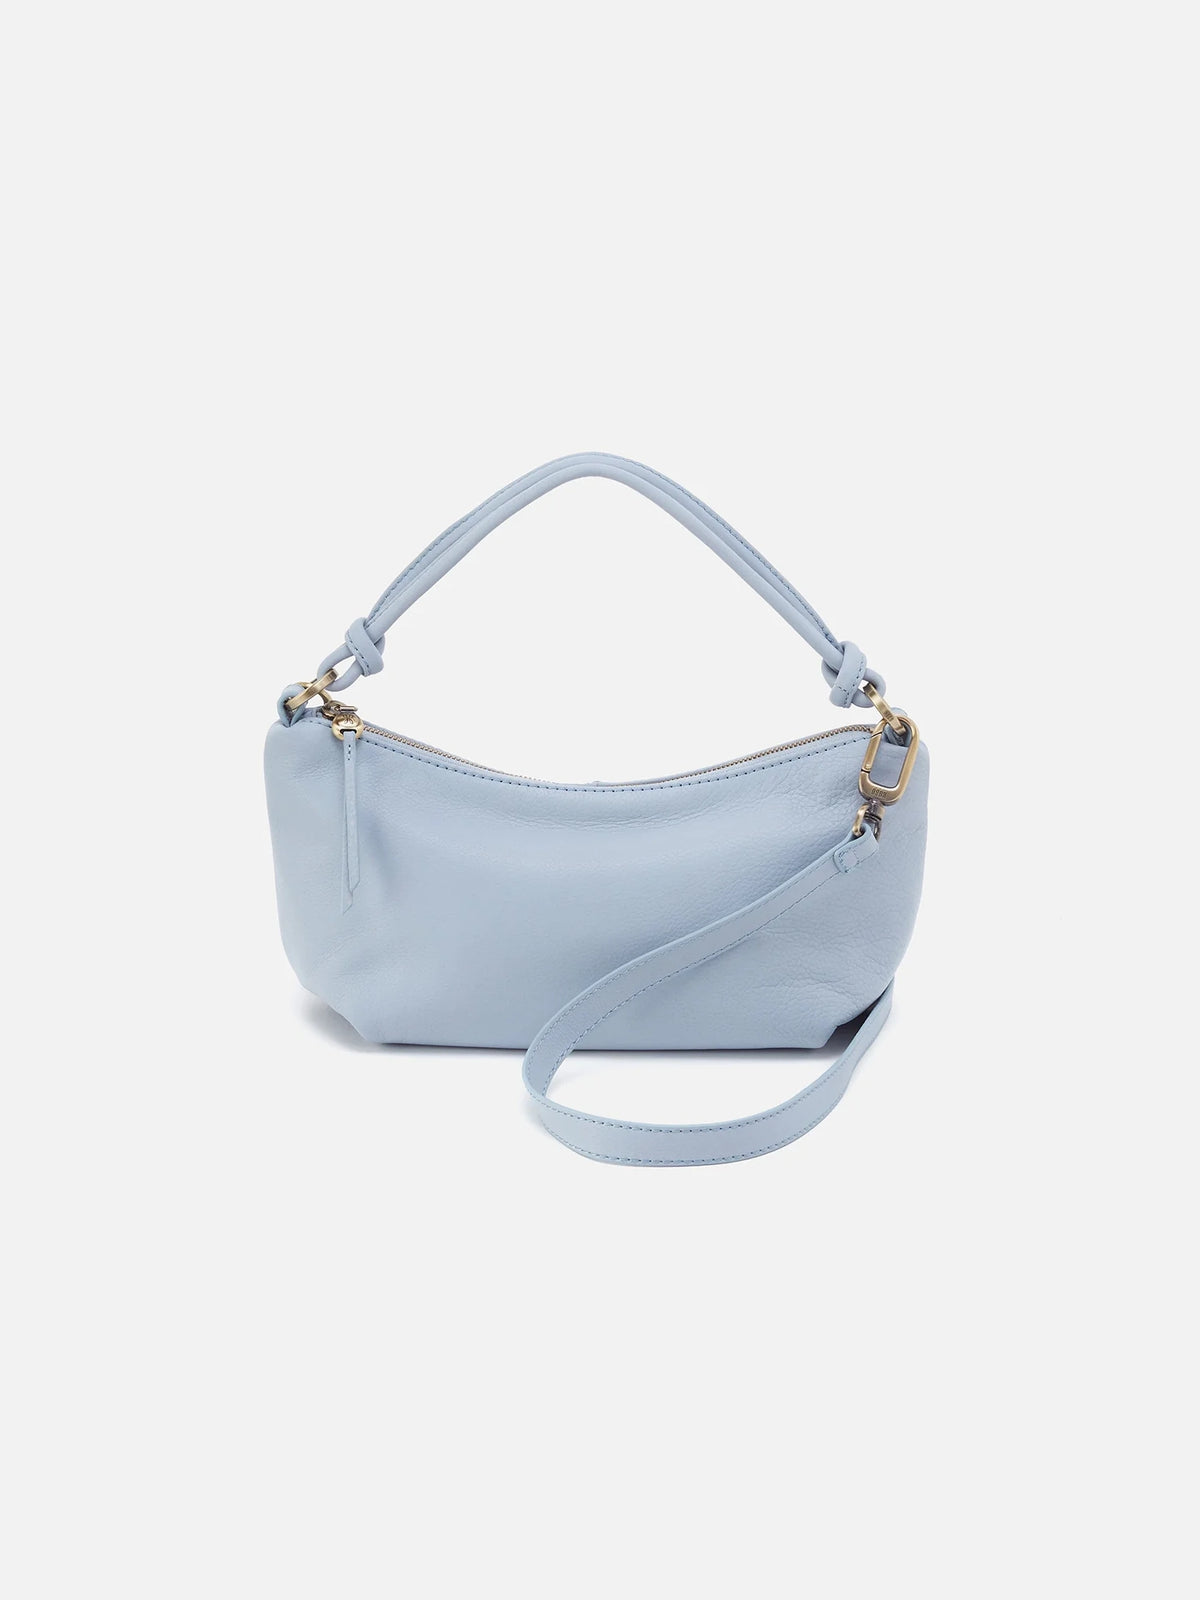 hobo lindley crossbody soft pebbled leather in pale blue-front view